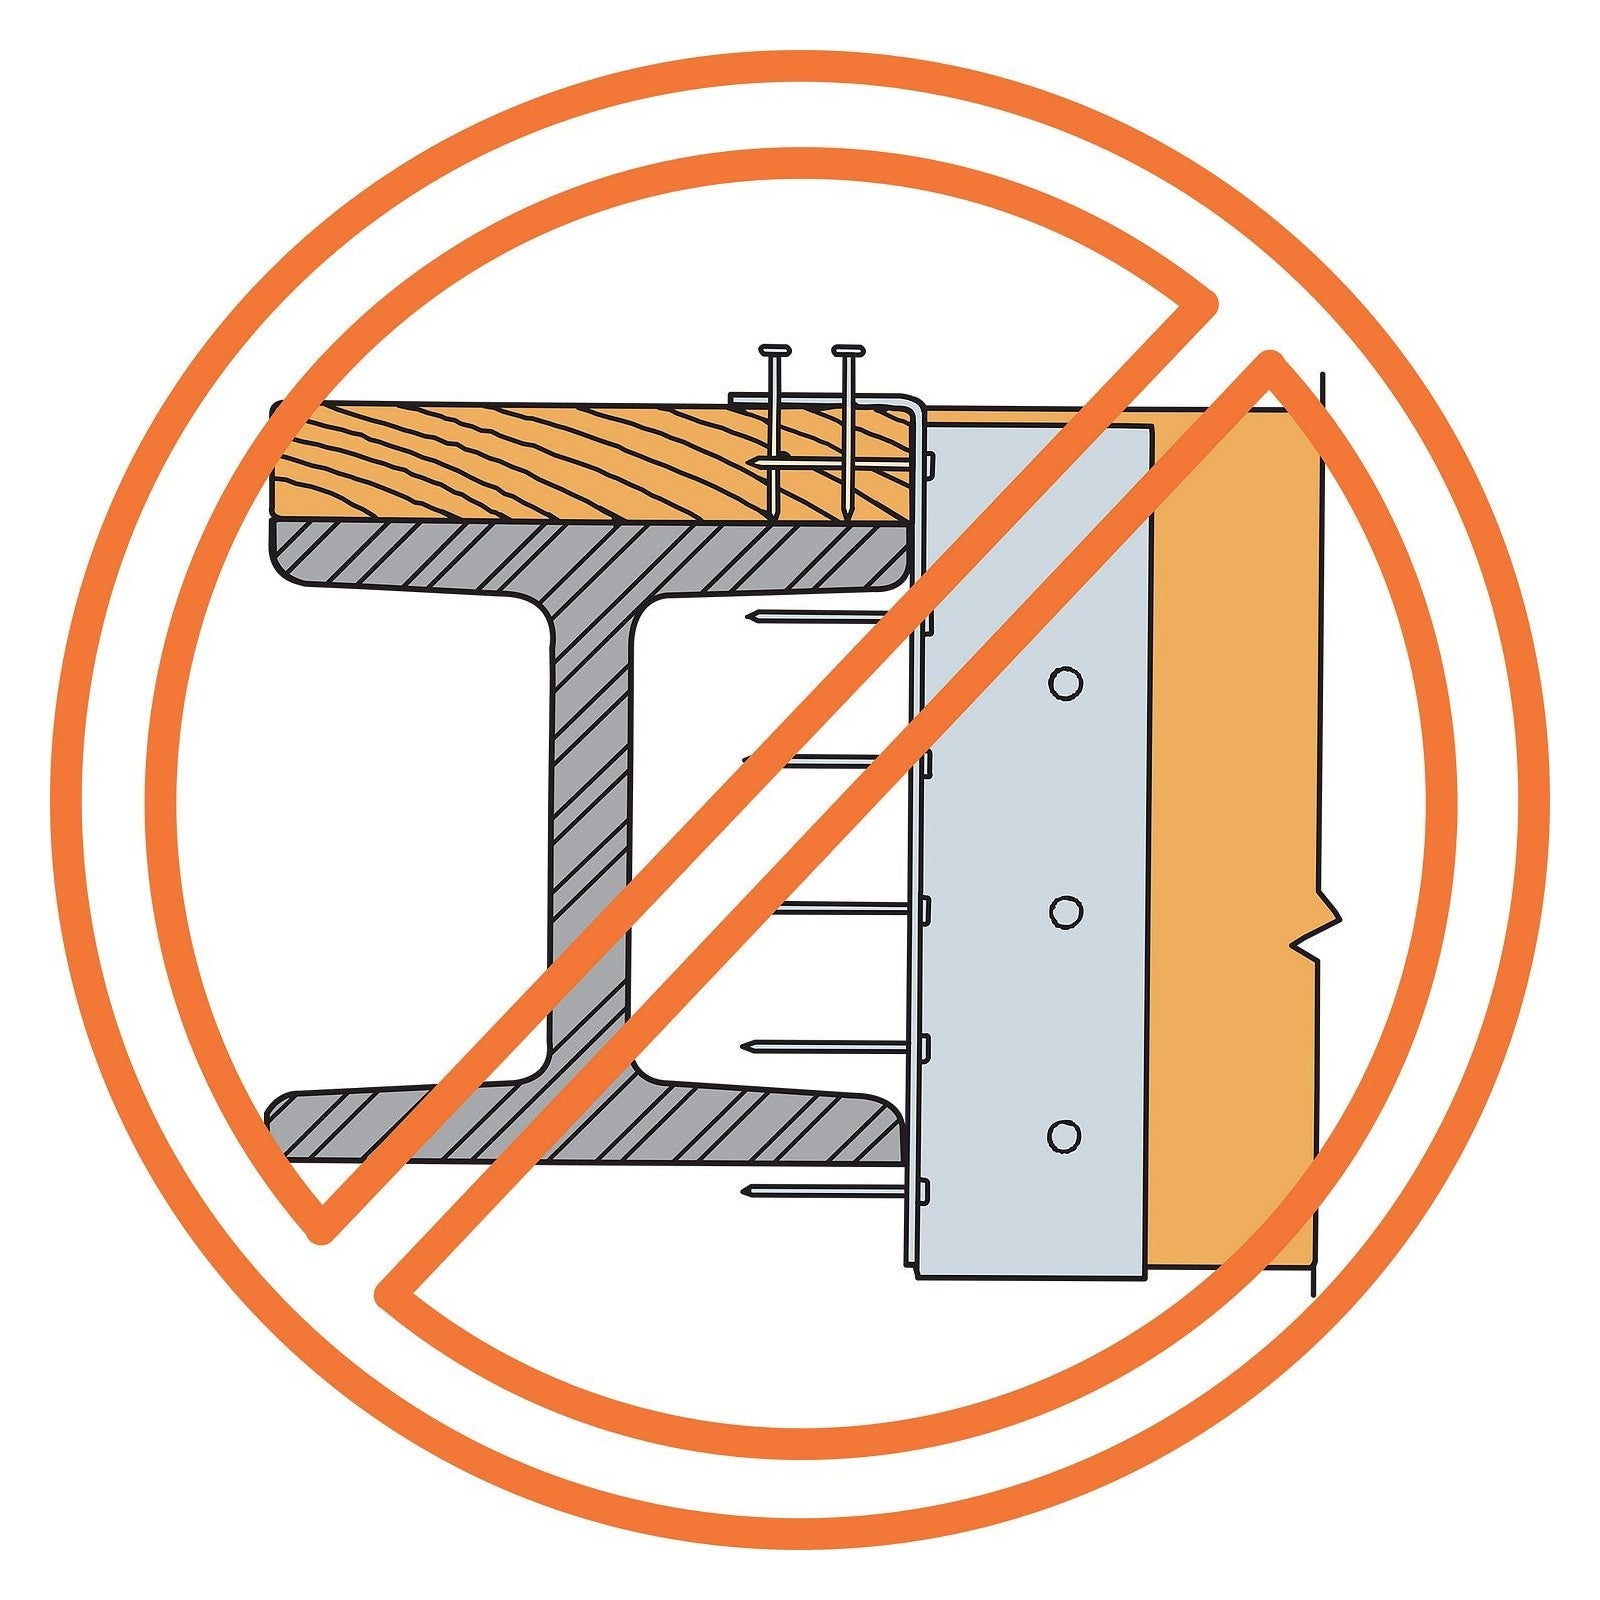 Nailer application is not acceptable. Fasteners cannot be installed